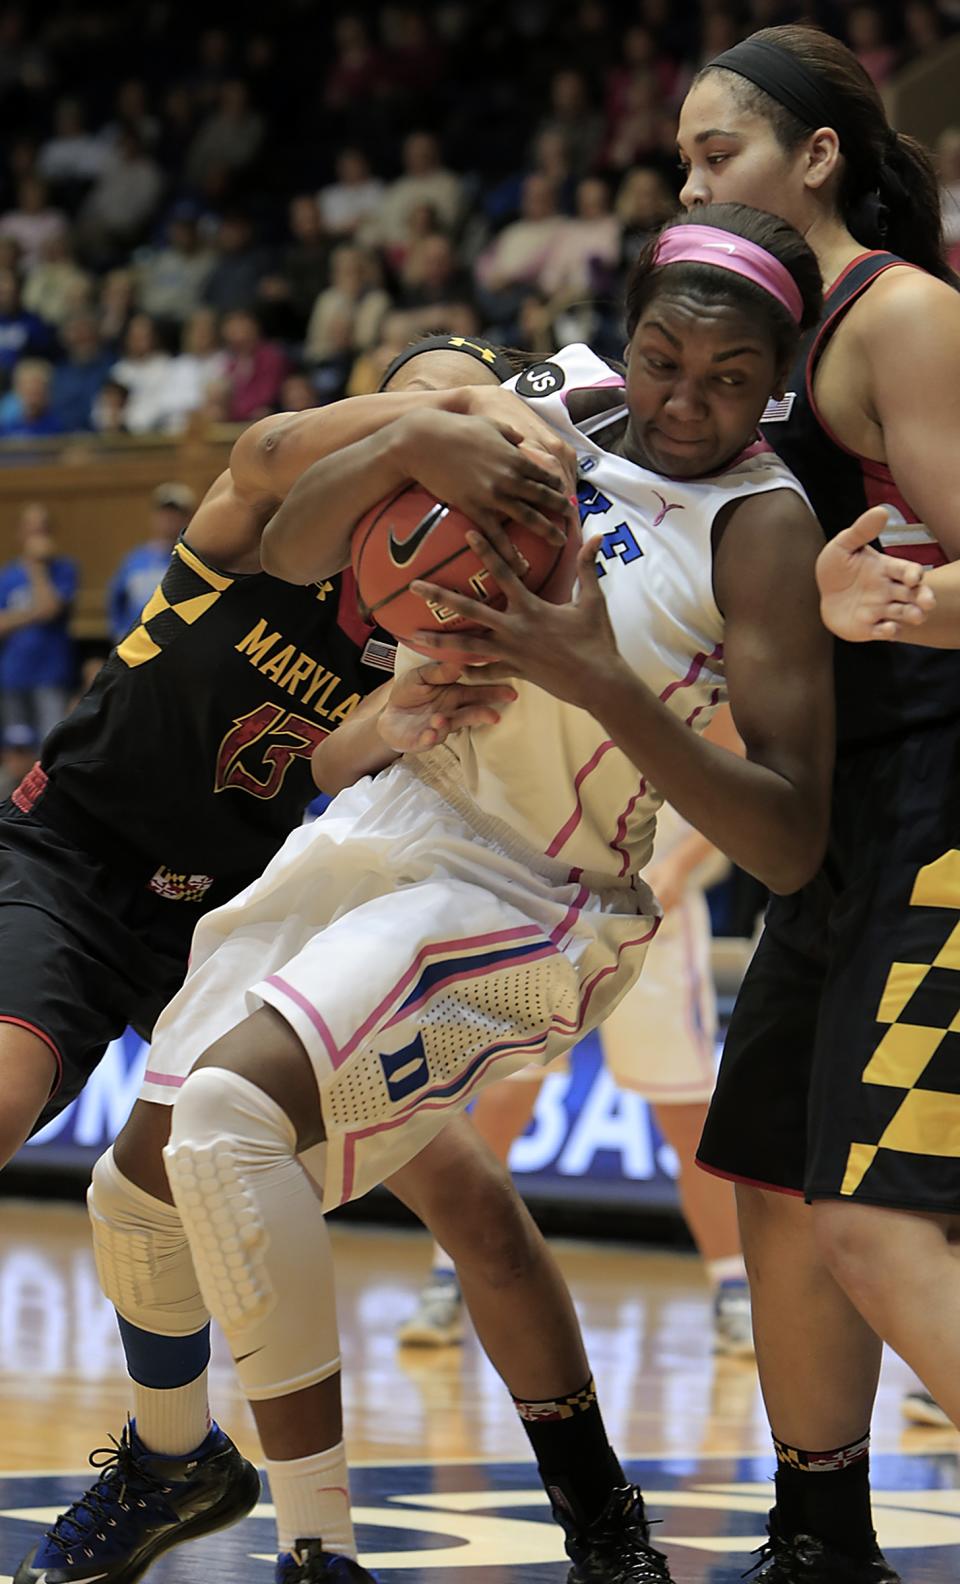 Duke's Elizabeth Williams, center, secures a loose ball between Maryland's Alicia DeVaughn, left, and Brionna Jones, right, during the first half of an NCAA college basketball game in Durham, N.C., Monday, Feb. 17, 2014. Duke led at halftime 38-31. (AP Photo/Ted Richardson)